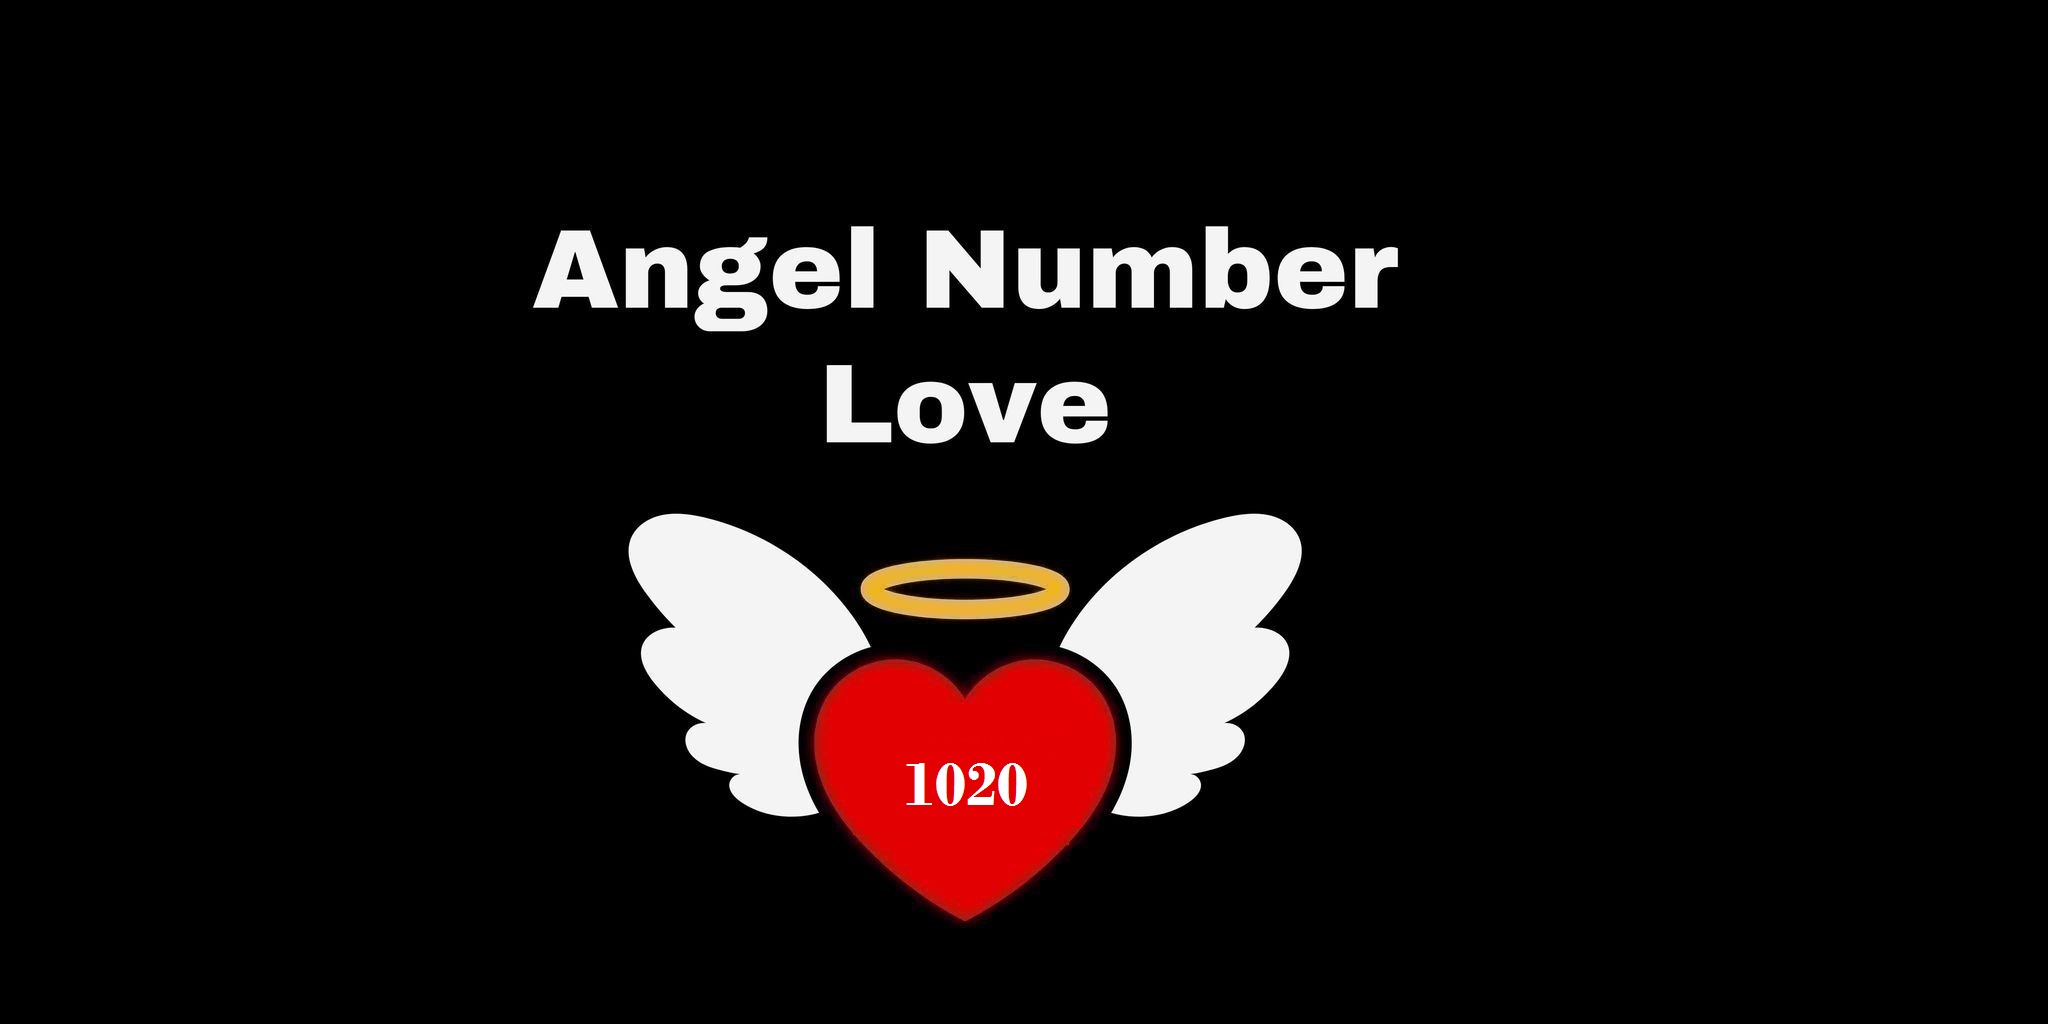 1020 Angel Number Meaning In Love